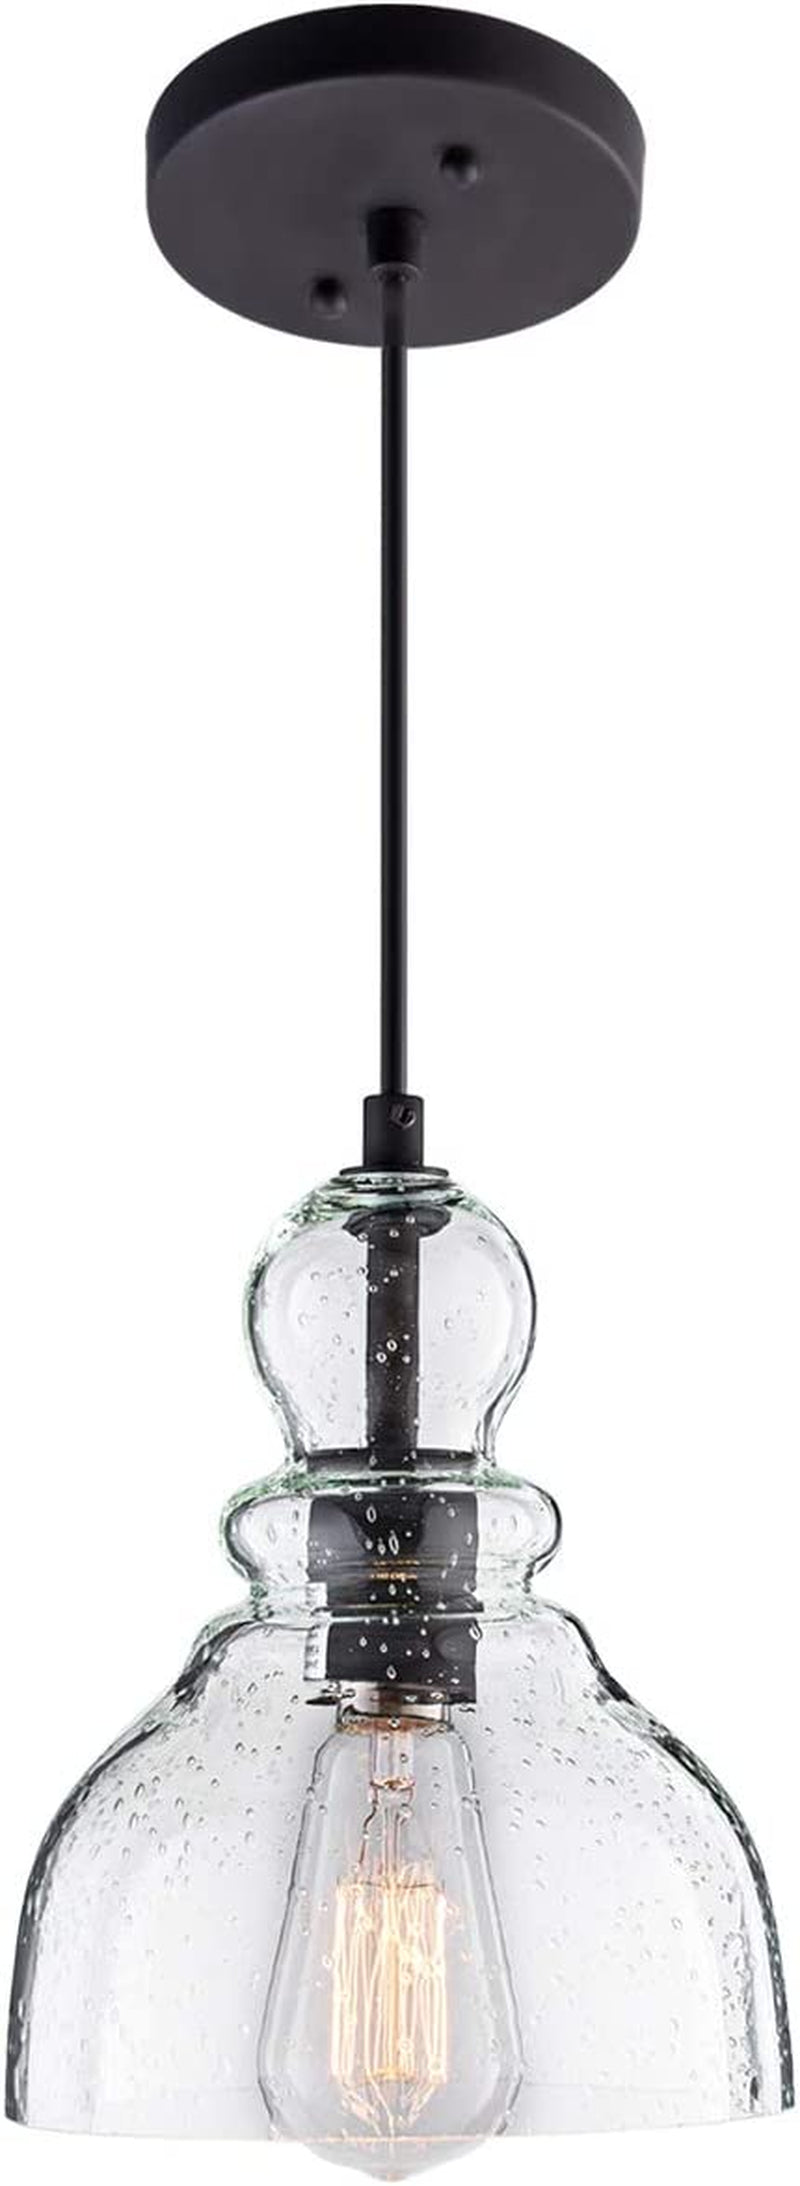 LANROS Farmhouse Kitchen Pendant Lighting with Handblown Clear Seeded Glass Shade, Adjustable Cord Mini Ceiling Light Fixture for Kitchen Island Sink, Matte Black Finish, 7Inch, 1 Pack Home & Garden > Lighting > Lighting Fixtures DONGLAIMEI Black 7inch 